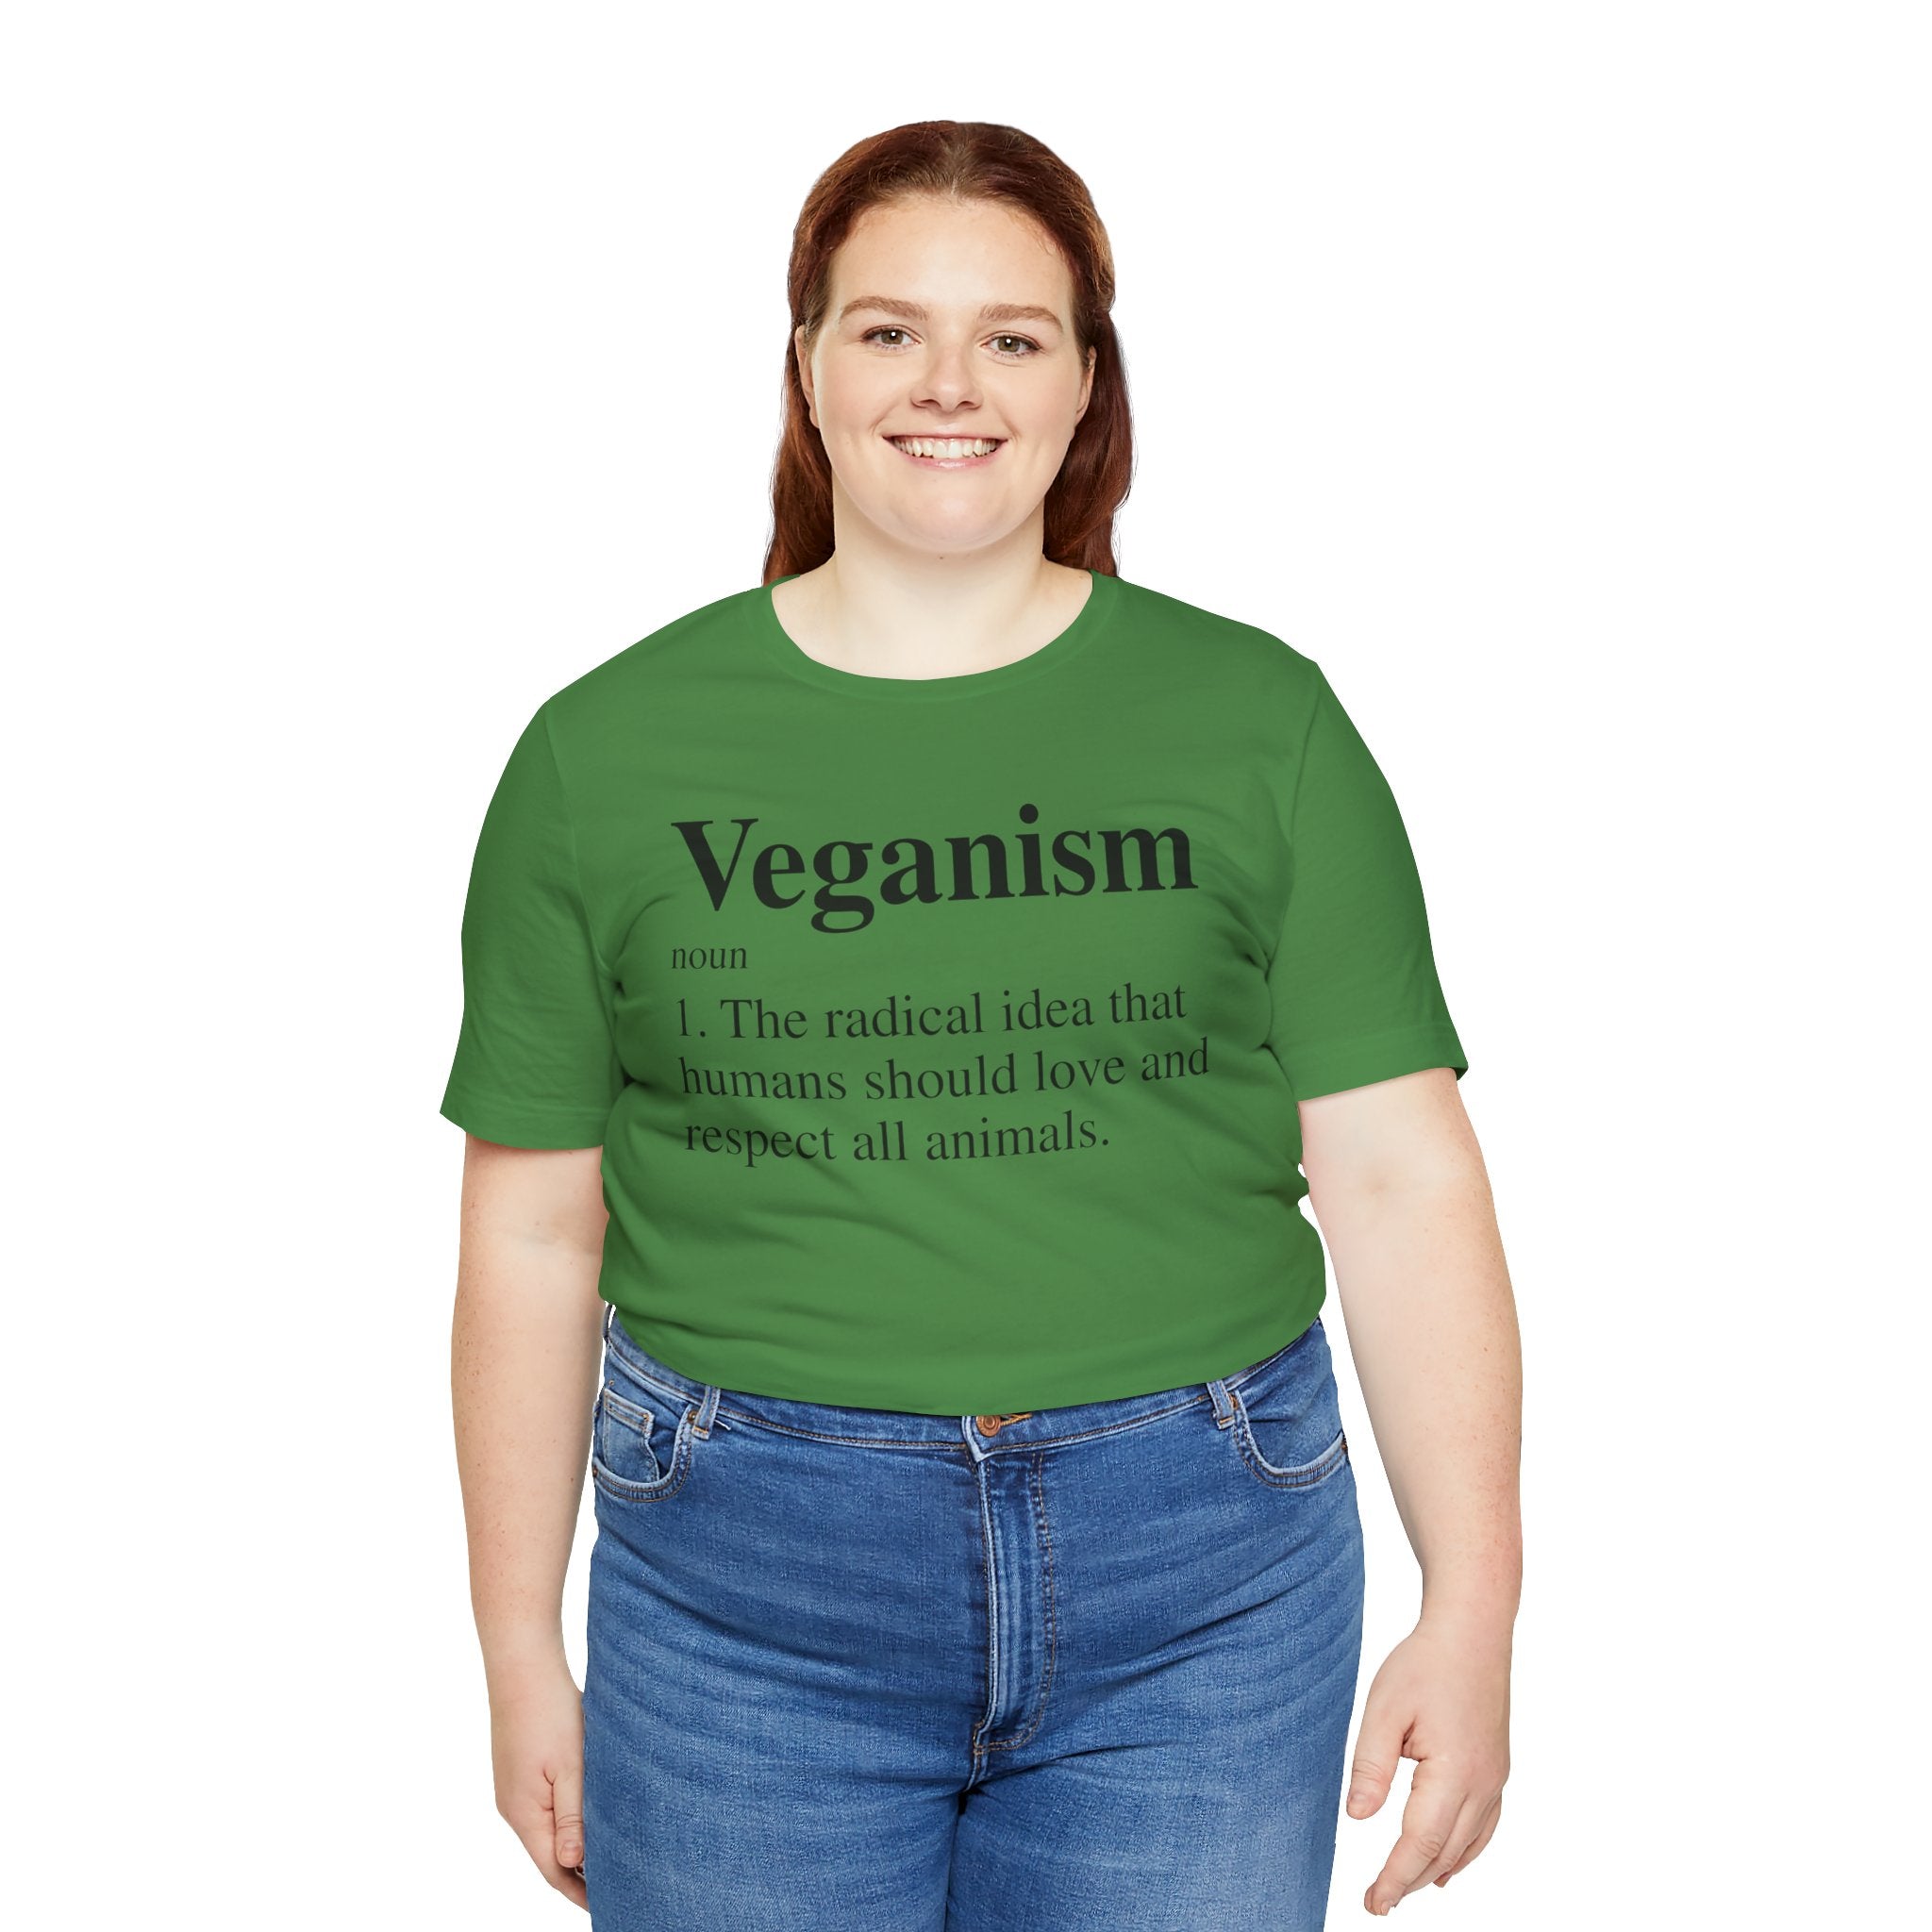 A woman with brown hair smiling in a Green Unisex Veganism T-Shirt, paired with blue jeans.